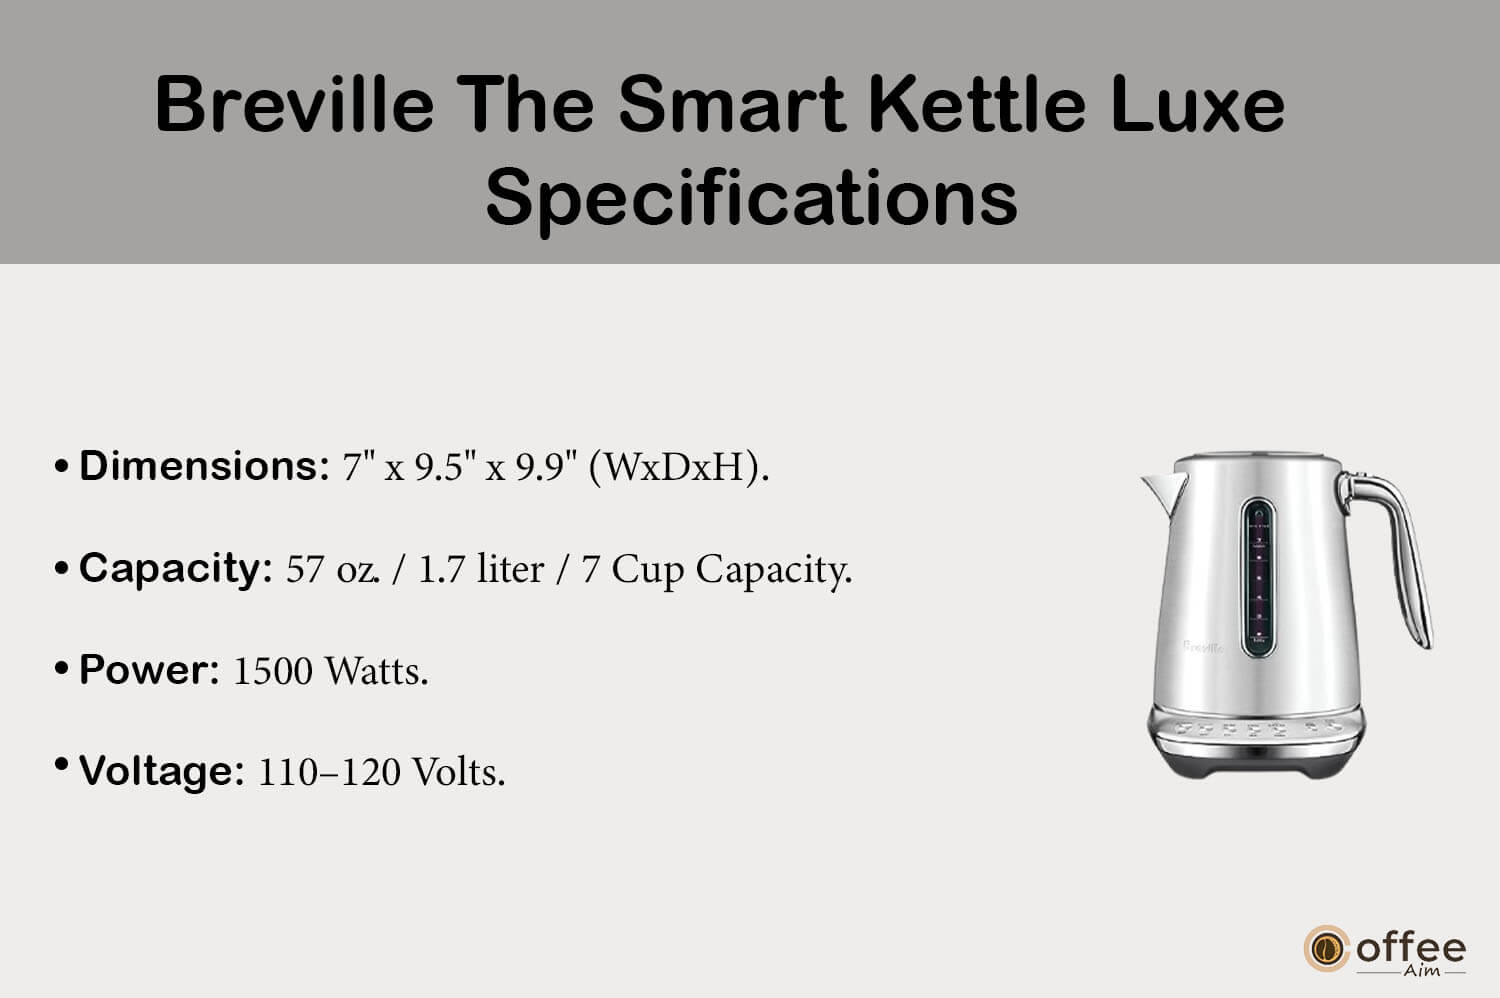 "This image showcases the specifications of 'Breville The Smart Kettle Luxe' as featured in our 'Breville The Smart Kettle Luxe Review' article."